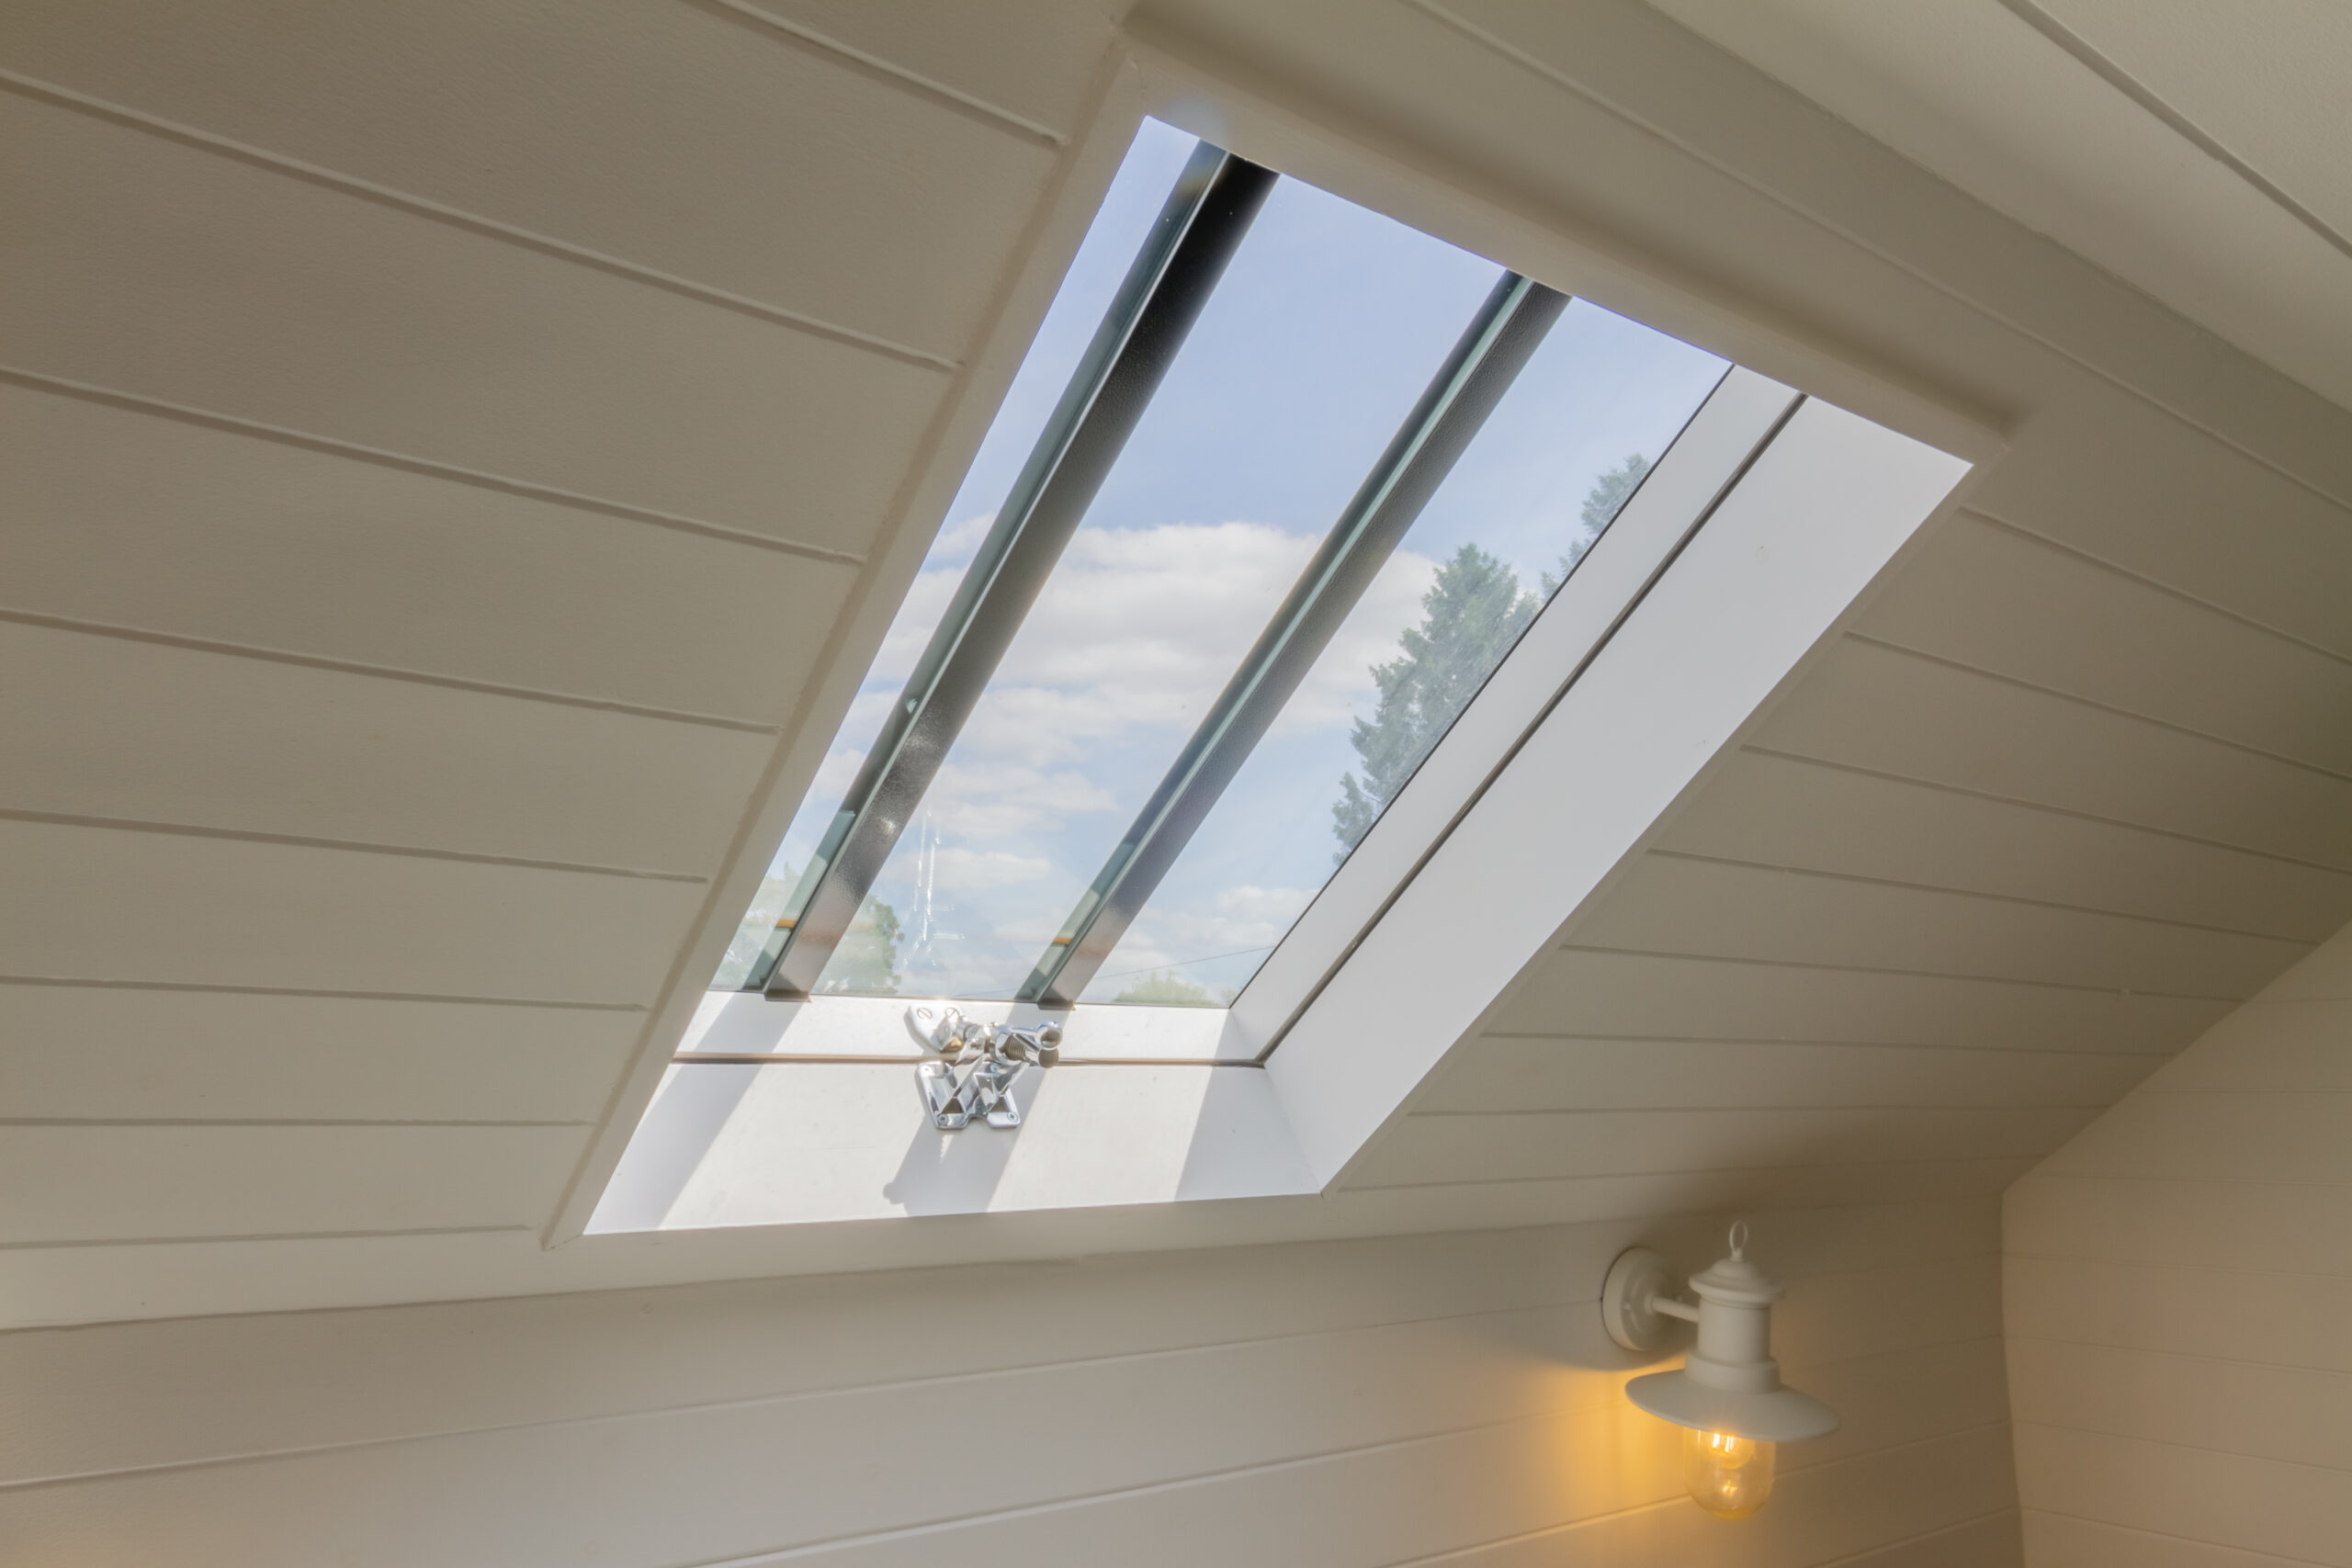 Conservation Rooflight in a bathroom setting. Double Red Duke - Home banner - Homeowner Hub Inspiration